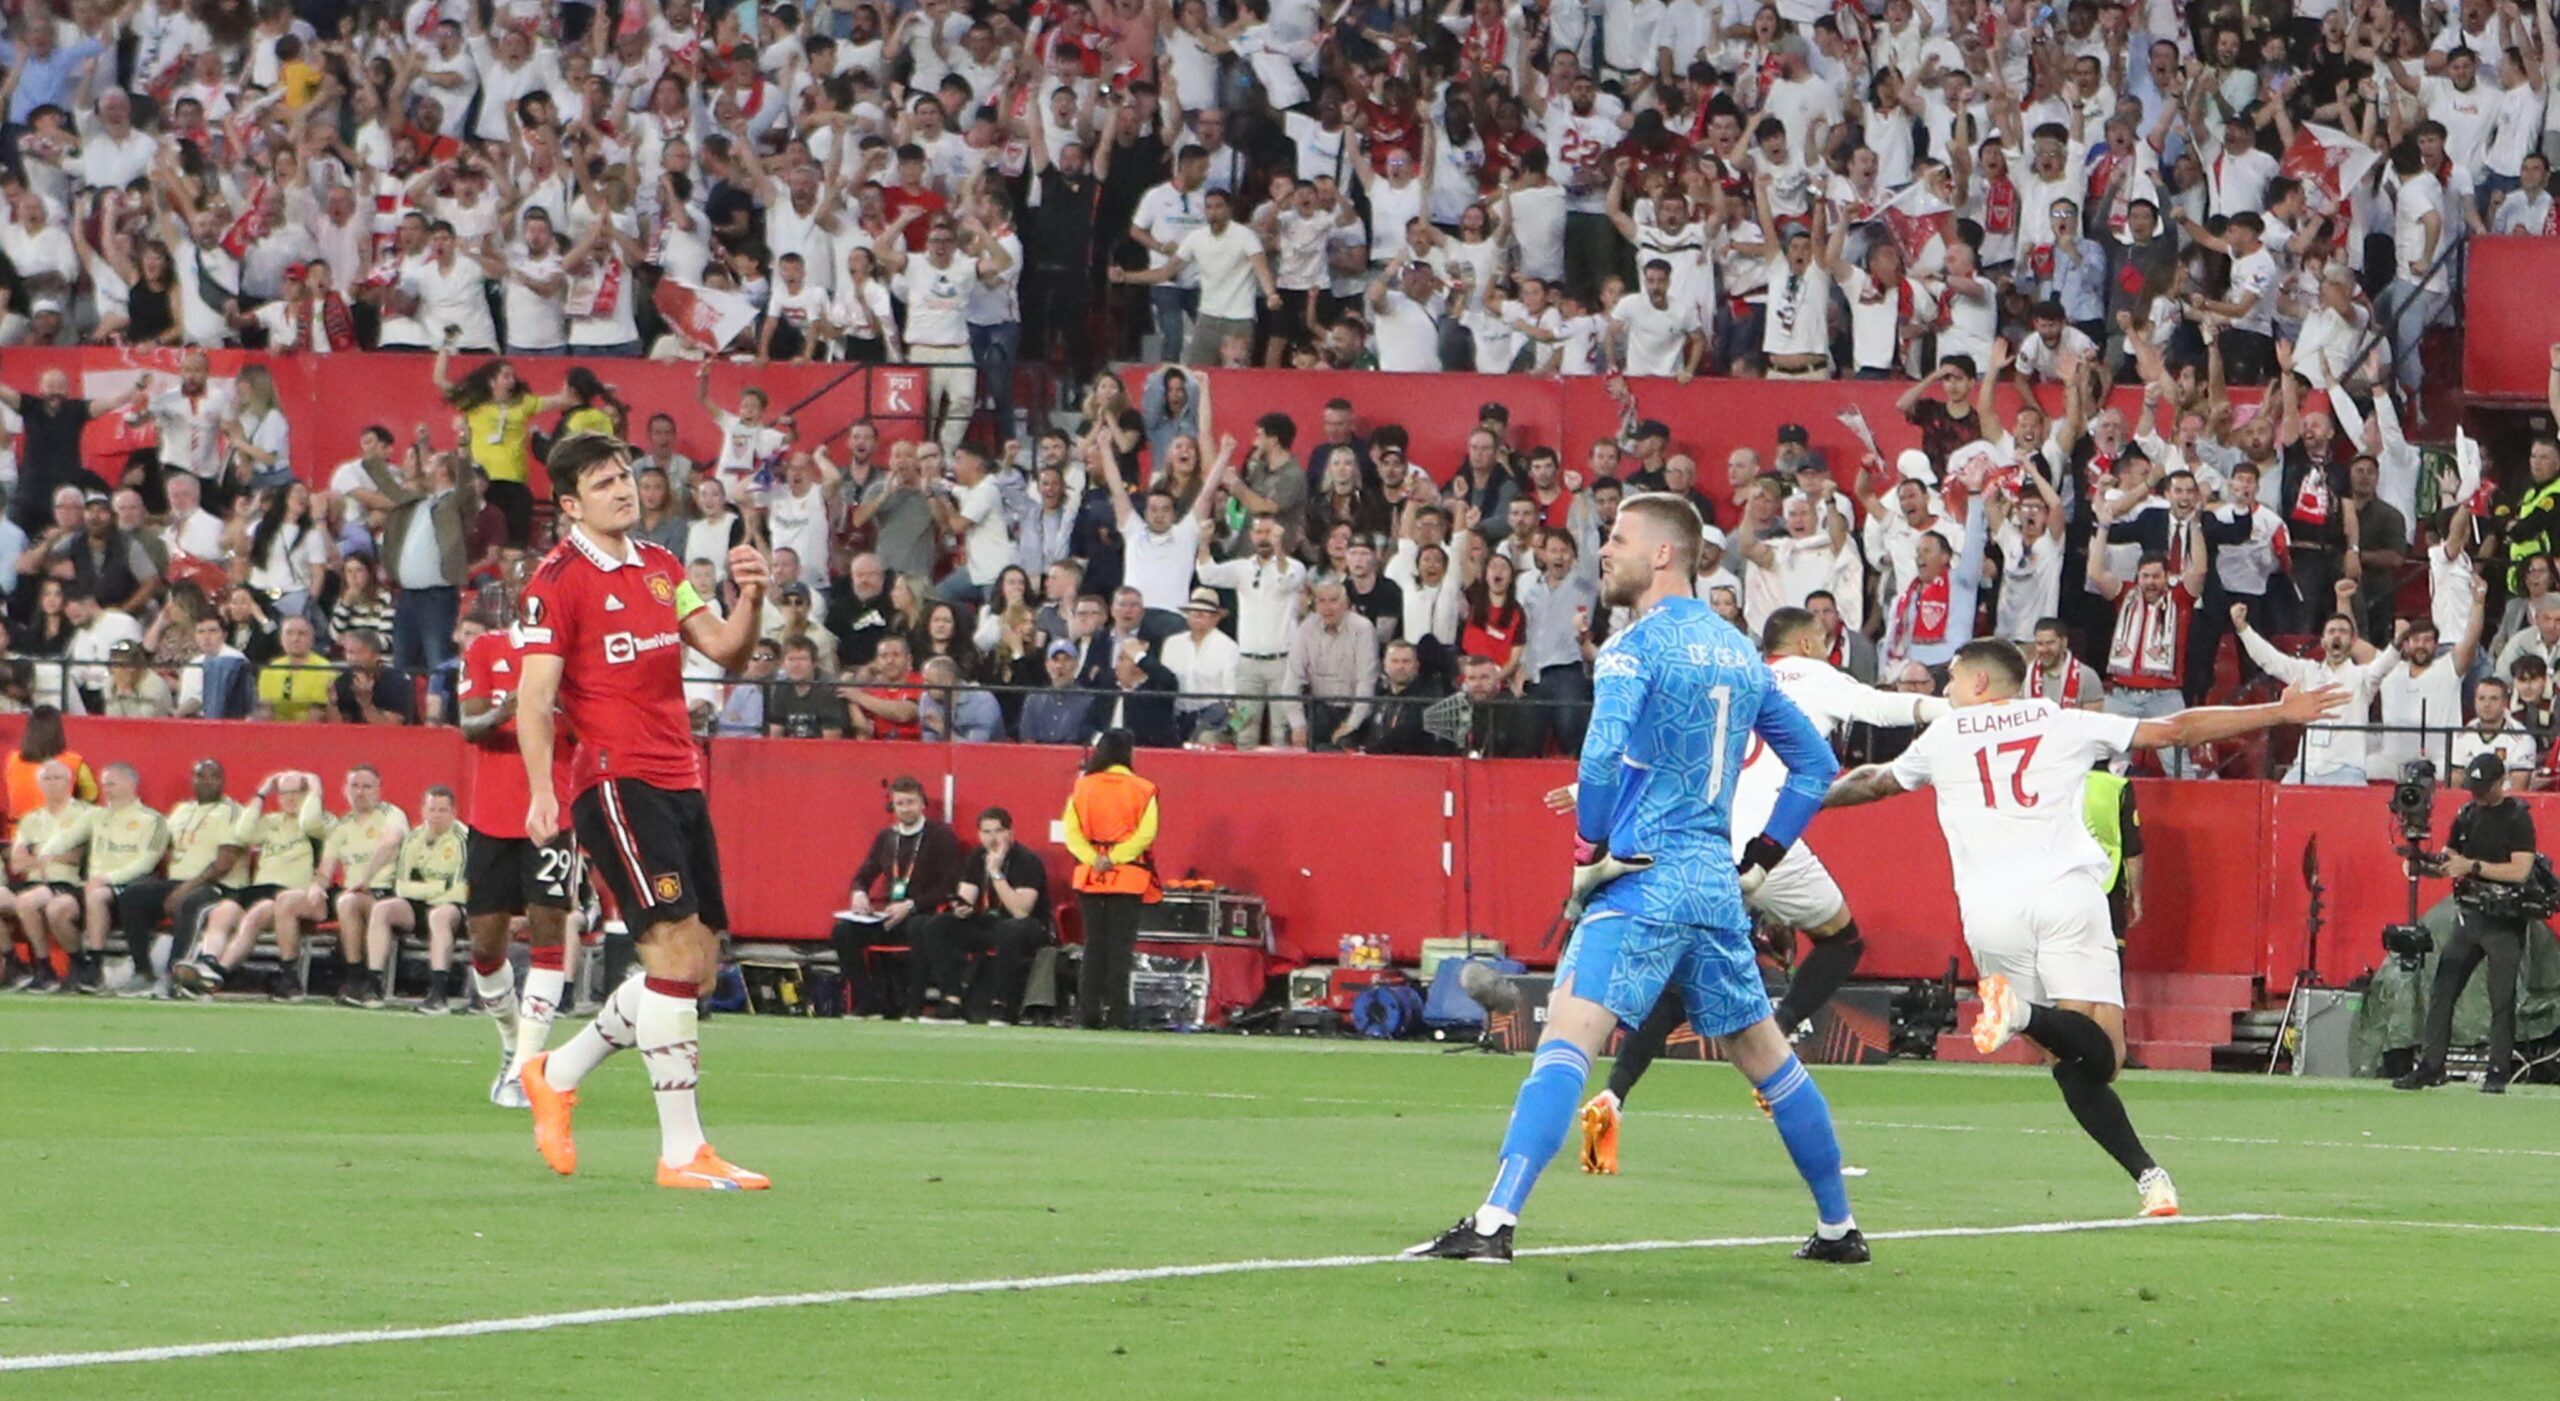 Manchester United bows out of Europa League after a disappointing 0-3 loss to Sevilla